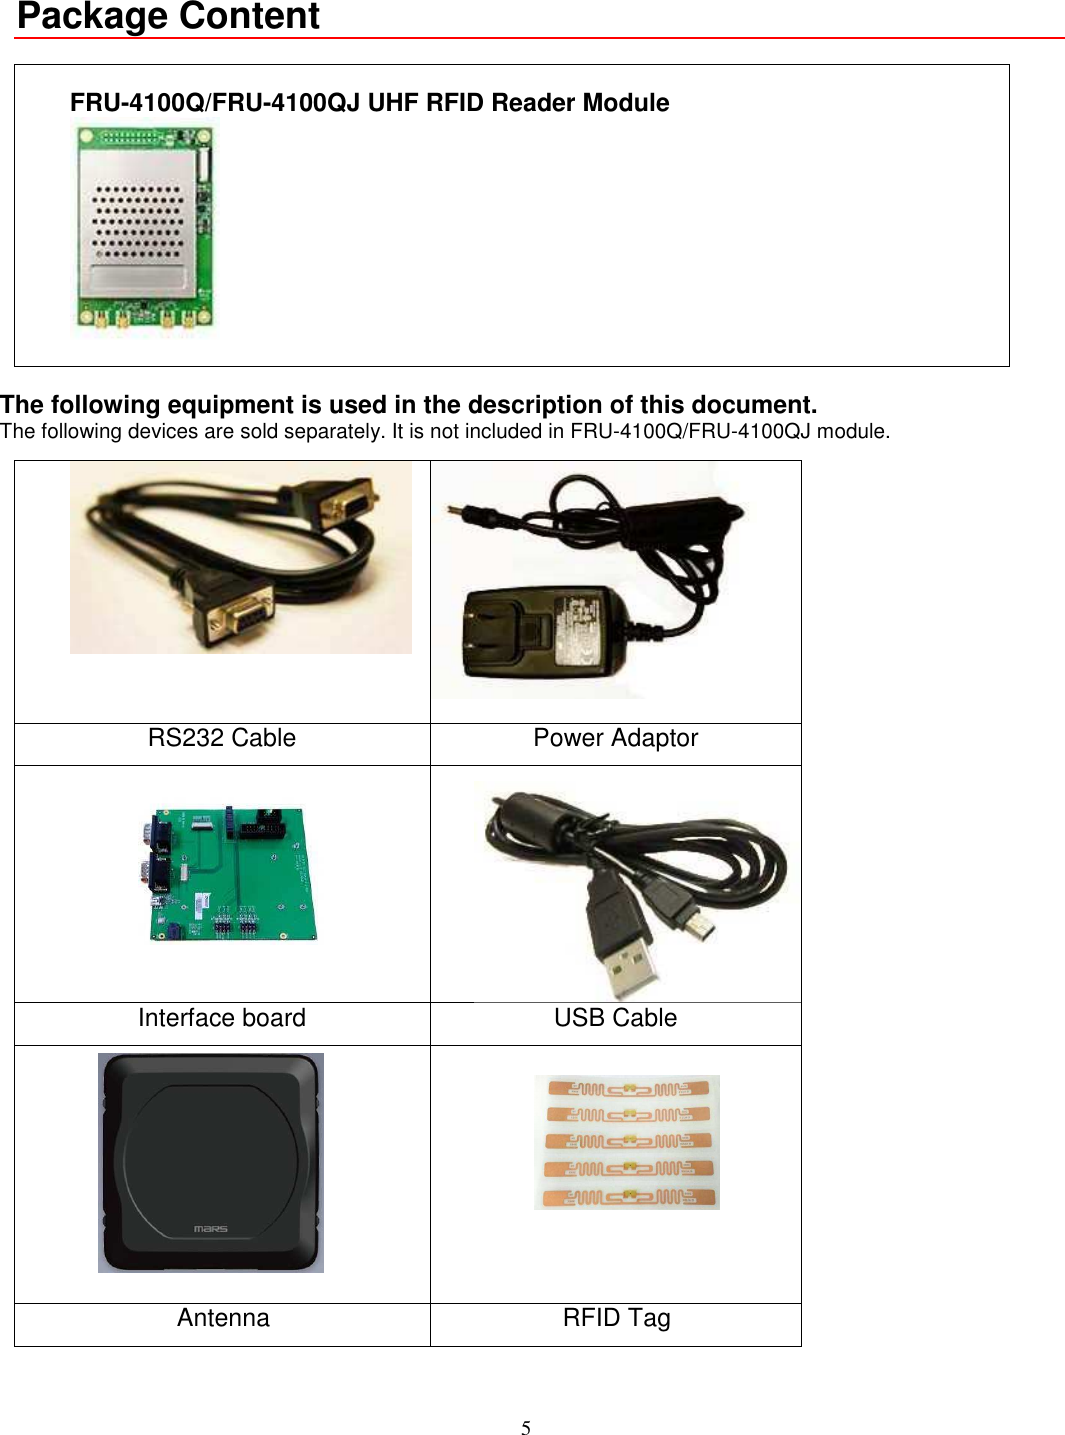 5   Package Content    FRU-4100Q/FRU-4100QJ UHF RFID Reader Module    The following equipment is used in the description of this document. The following devices are sold separately. It is not included in FRU-4100Q/FRU-4100QJ module.     RS232 Cable  Power Adaptor      Interface board  USB Cable      Antenna  RFID Tag 